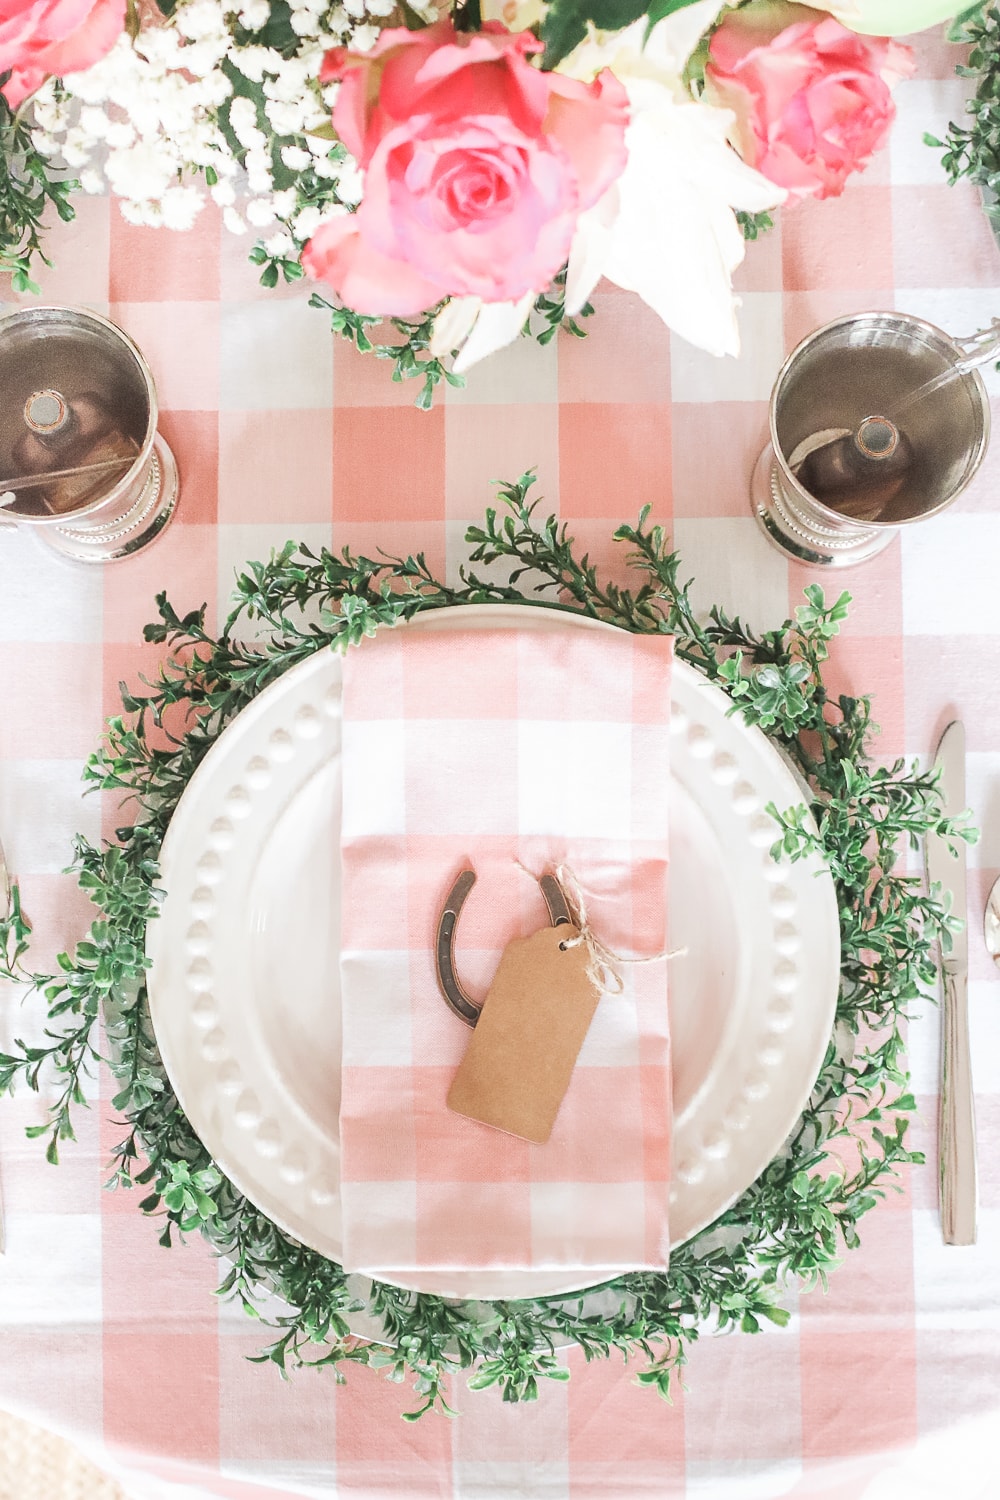 DIY boxwood chargers tutorial by DIY blogger Stephanie Ziajka on Diary of a Debutante